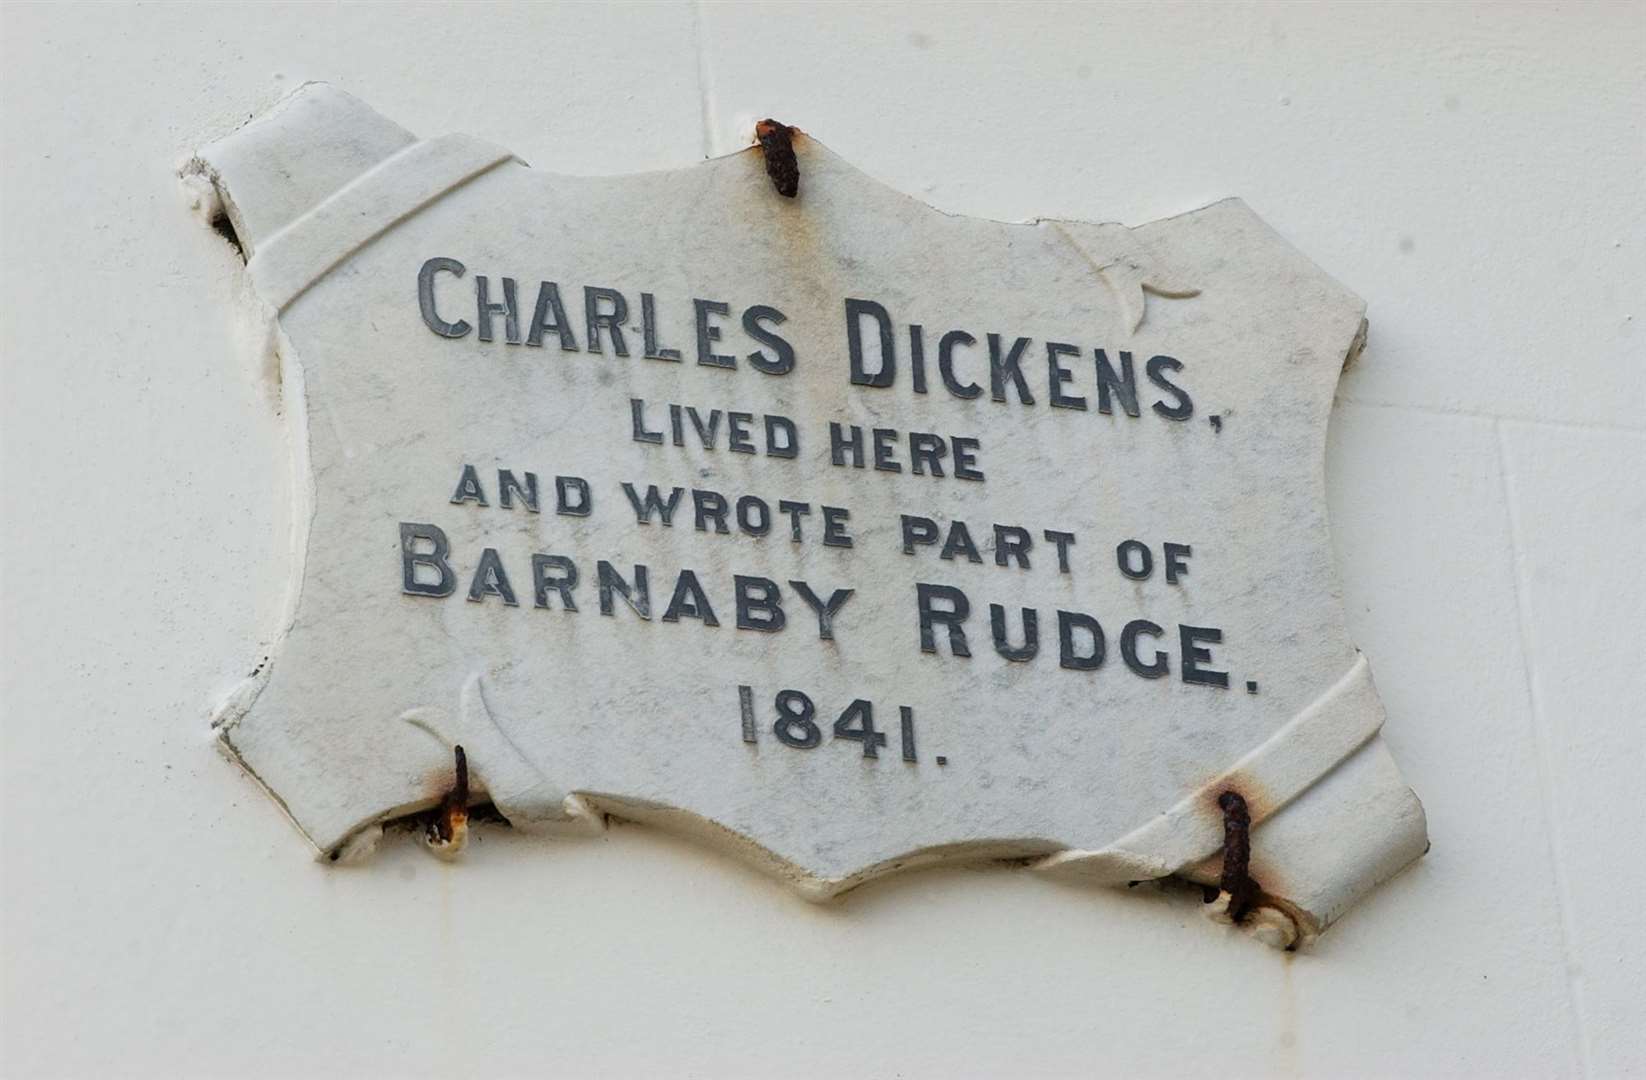 The author stayed in Archway House in Broadstairs and wrote part of Barnaby Rudge in 1841 - a book for which his pet raven was an inspiration